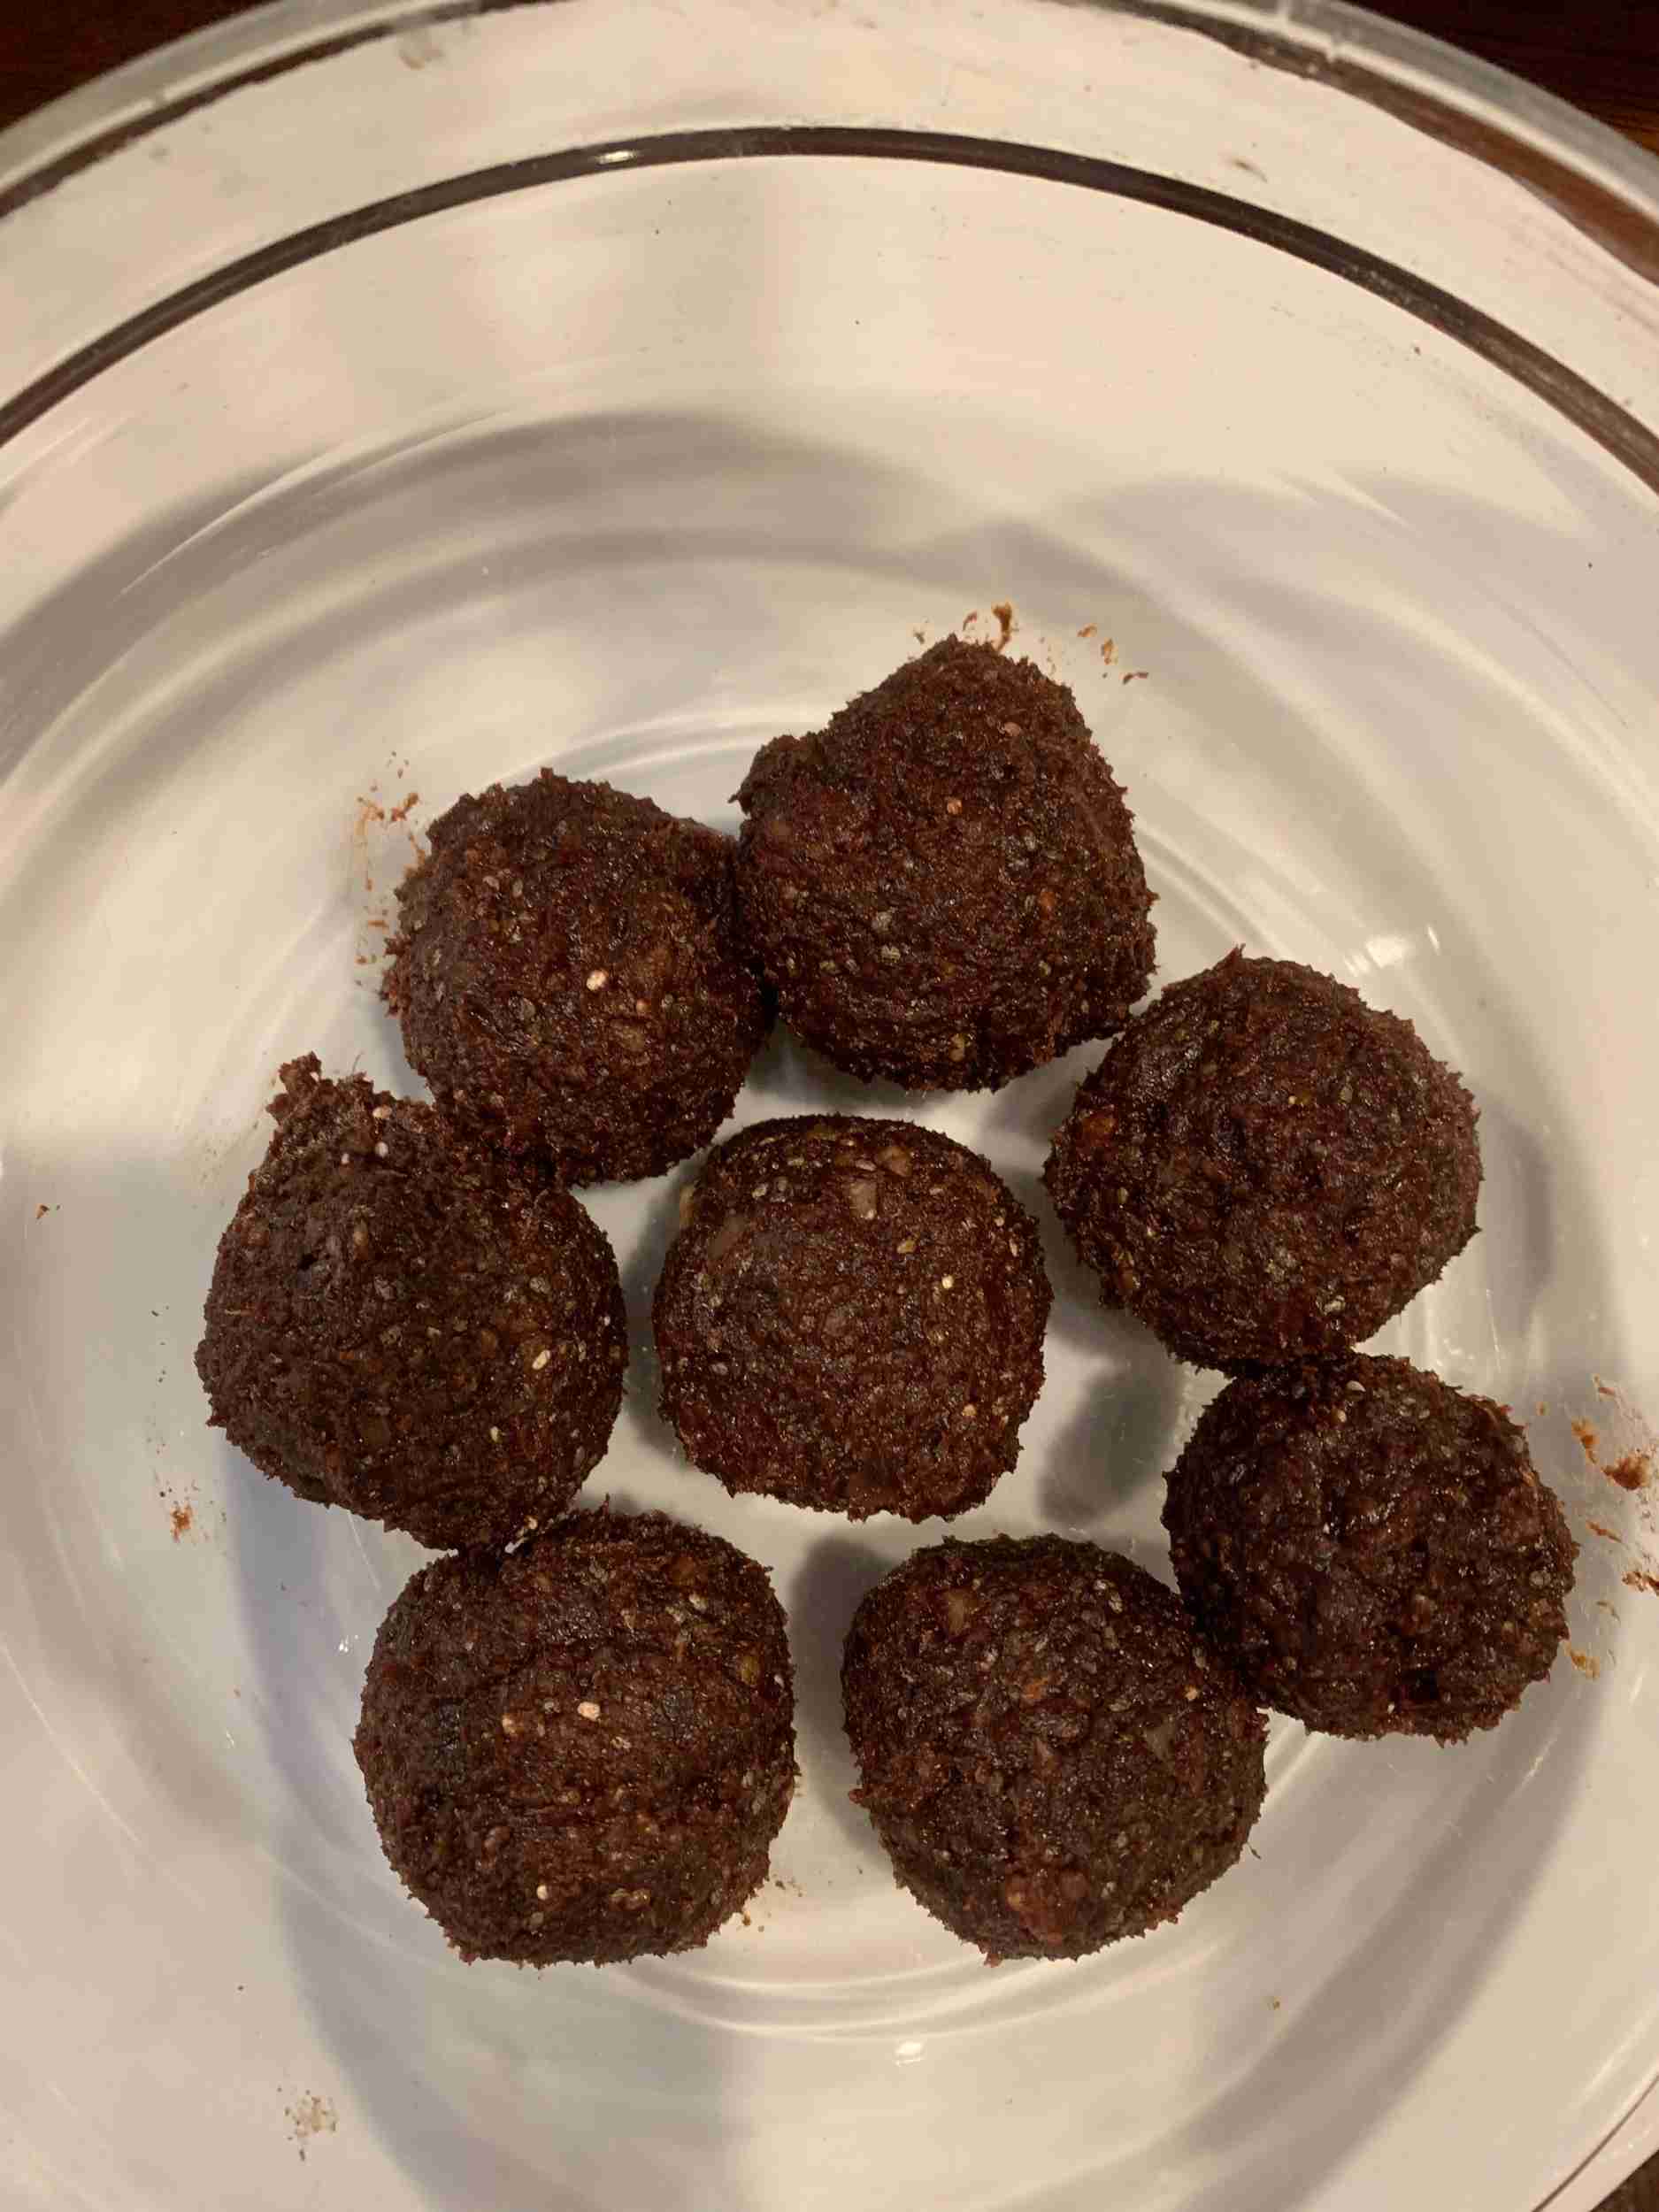 Here are the eight brownie bites from the Healthy Brownies Recipe before heading to the refrigerator to firm up.